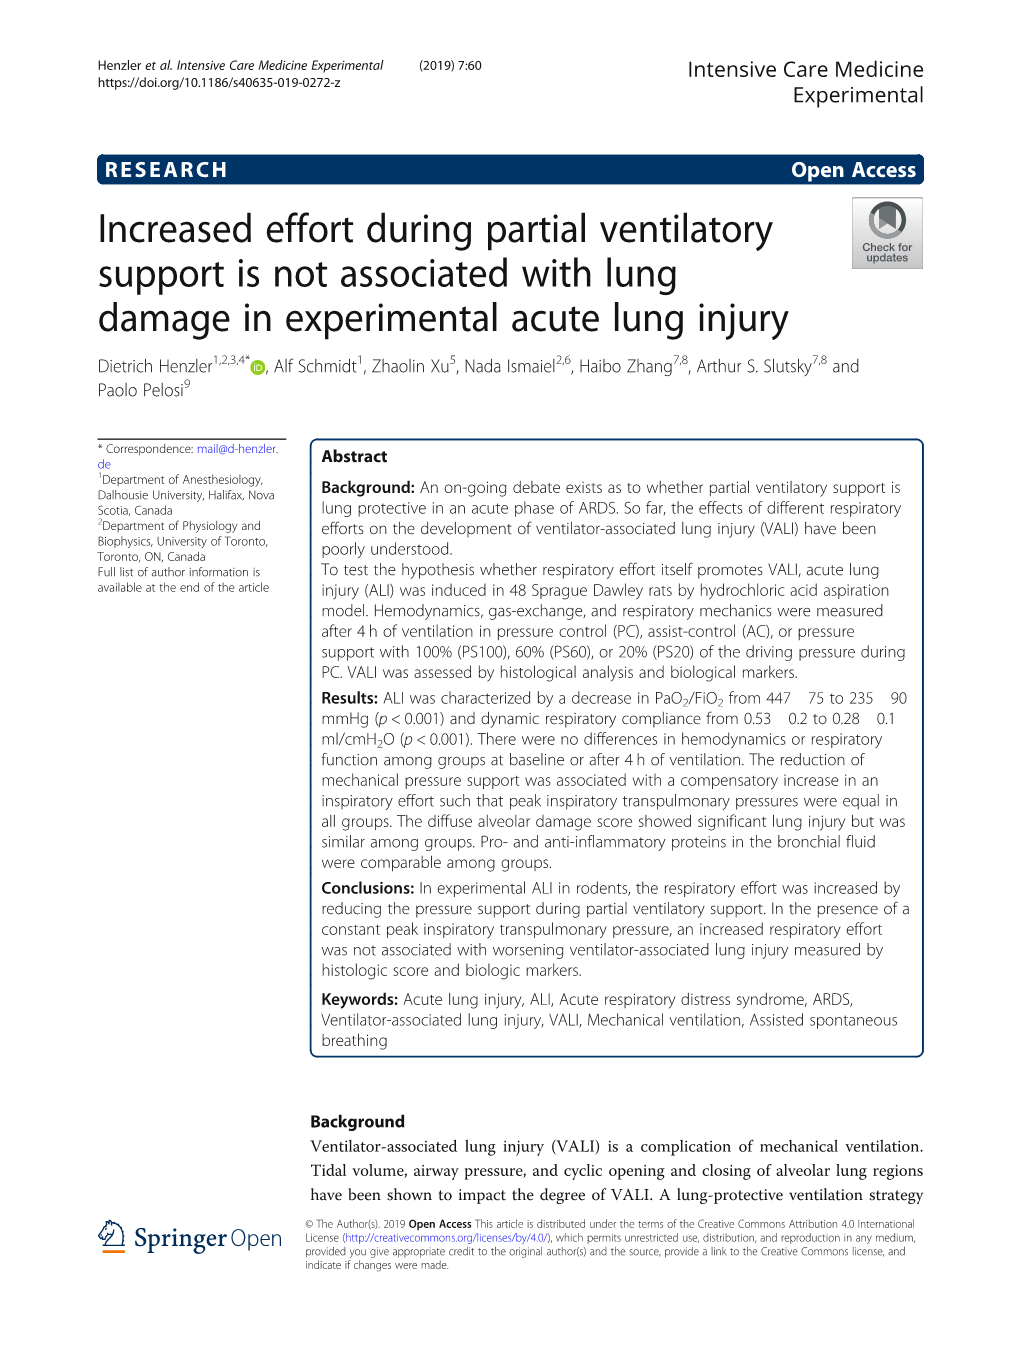 Increased Effort During Partial Ventilatory Support Is Not Associated